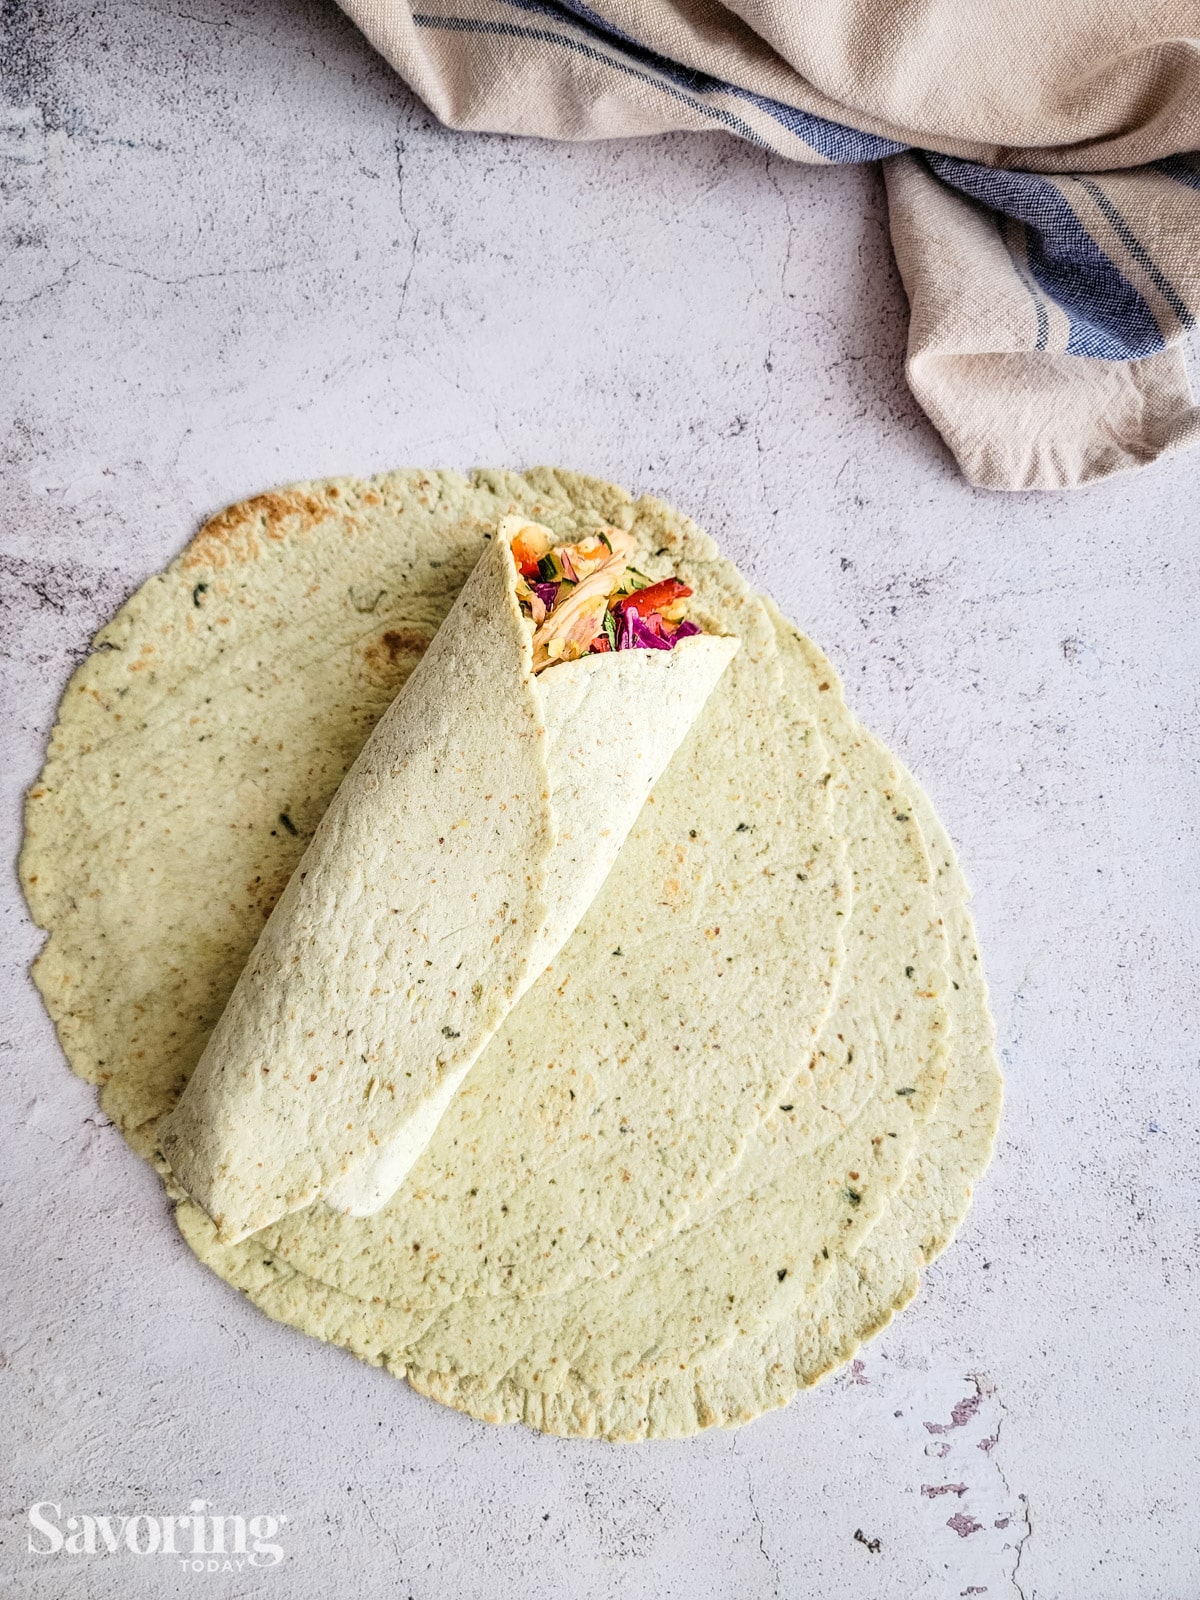 Chicken salad wrapped in a tortilla on a stack of tortillas